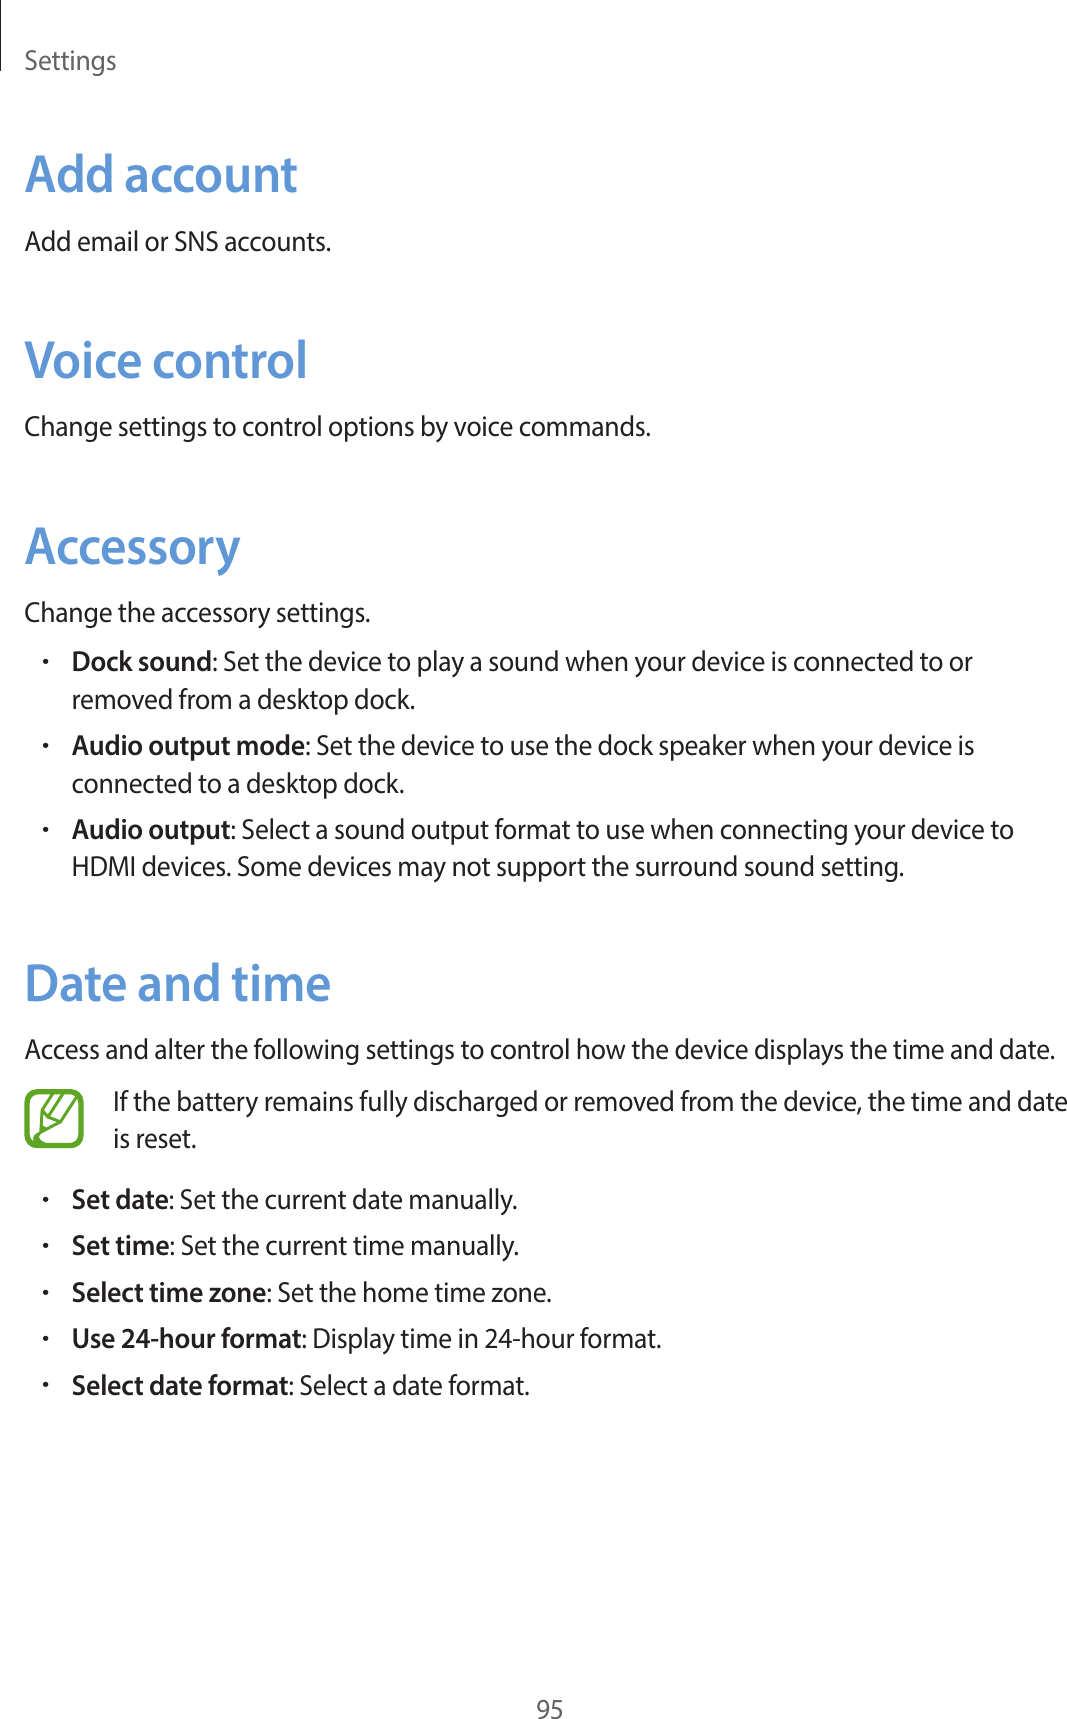 Settings95Add accountAdd email or SNS accounts.Voice controlChange settings to control options by voice commands.AccessoryChange the accessory settings.•Dock sound: Set the device to play a sound when your device is connected to or removed from a desktop dock.•Audio output mode: Set the device to use the dock speaker when your device is connected to a desktop dock.•Audio output: Select a sound output format to use when connecting your device to HDMI devices. Some devices may not support the surround sound setting.Date and timeAccess and alter the following settings to control how the device displays the time and date.If the battery remains fully discharged or removed from the device, the time and date is reset.•Set date: Set the current date manually.•Set time: Set the current time manually.•Select time zone: Set the home time zone.•Use 24-hour format: Display time in 24-hour format.•Select date format: Select a date format.